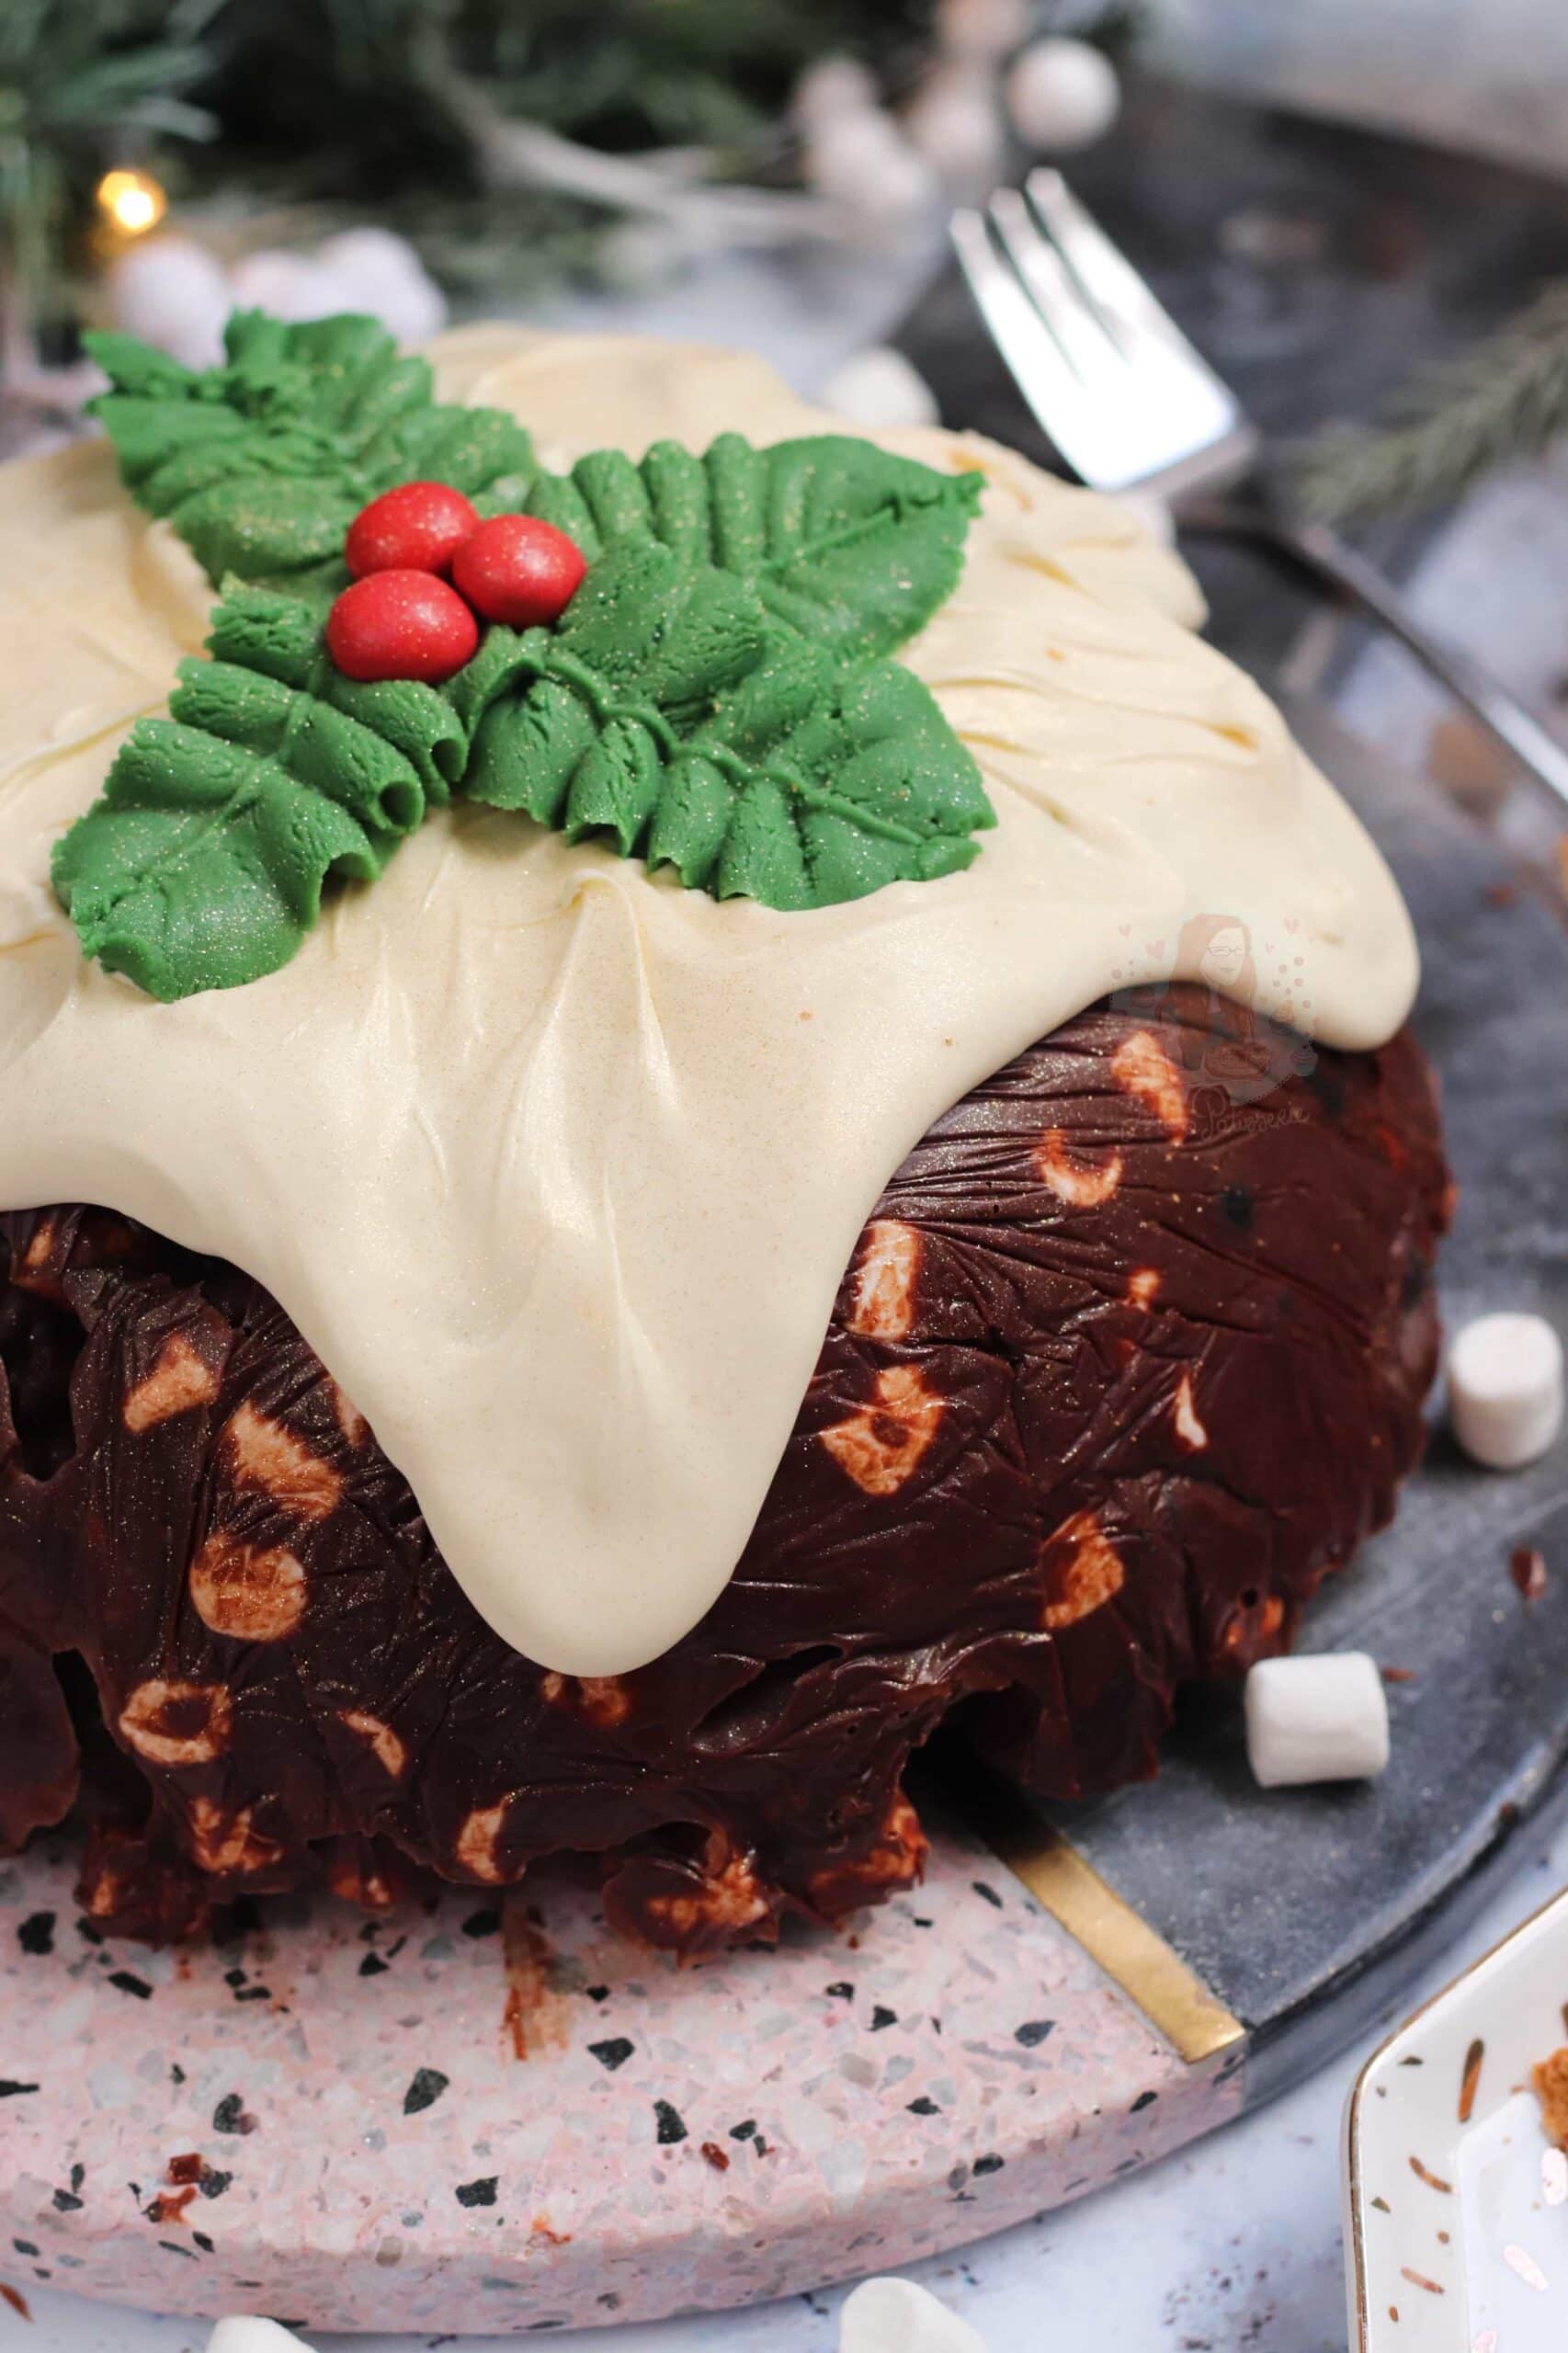 Rocky Road Christmas Pudding! - Jane's Patisserie